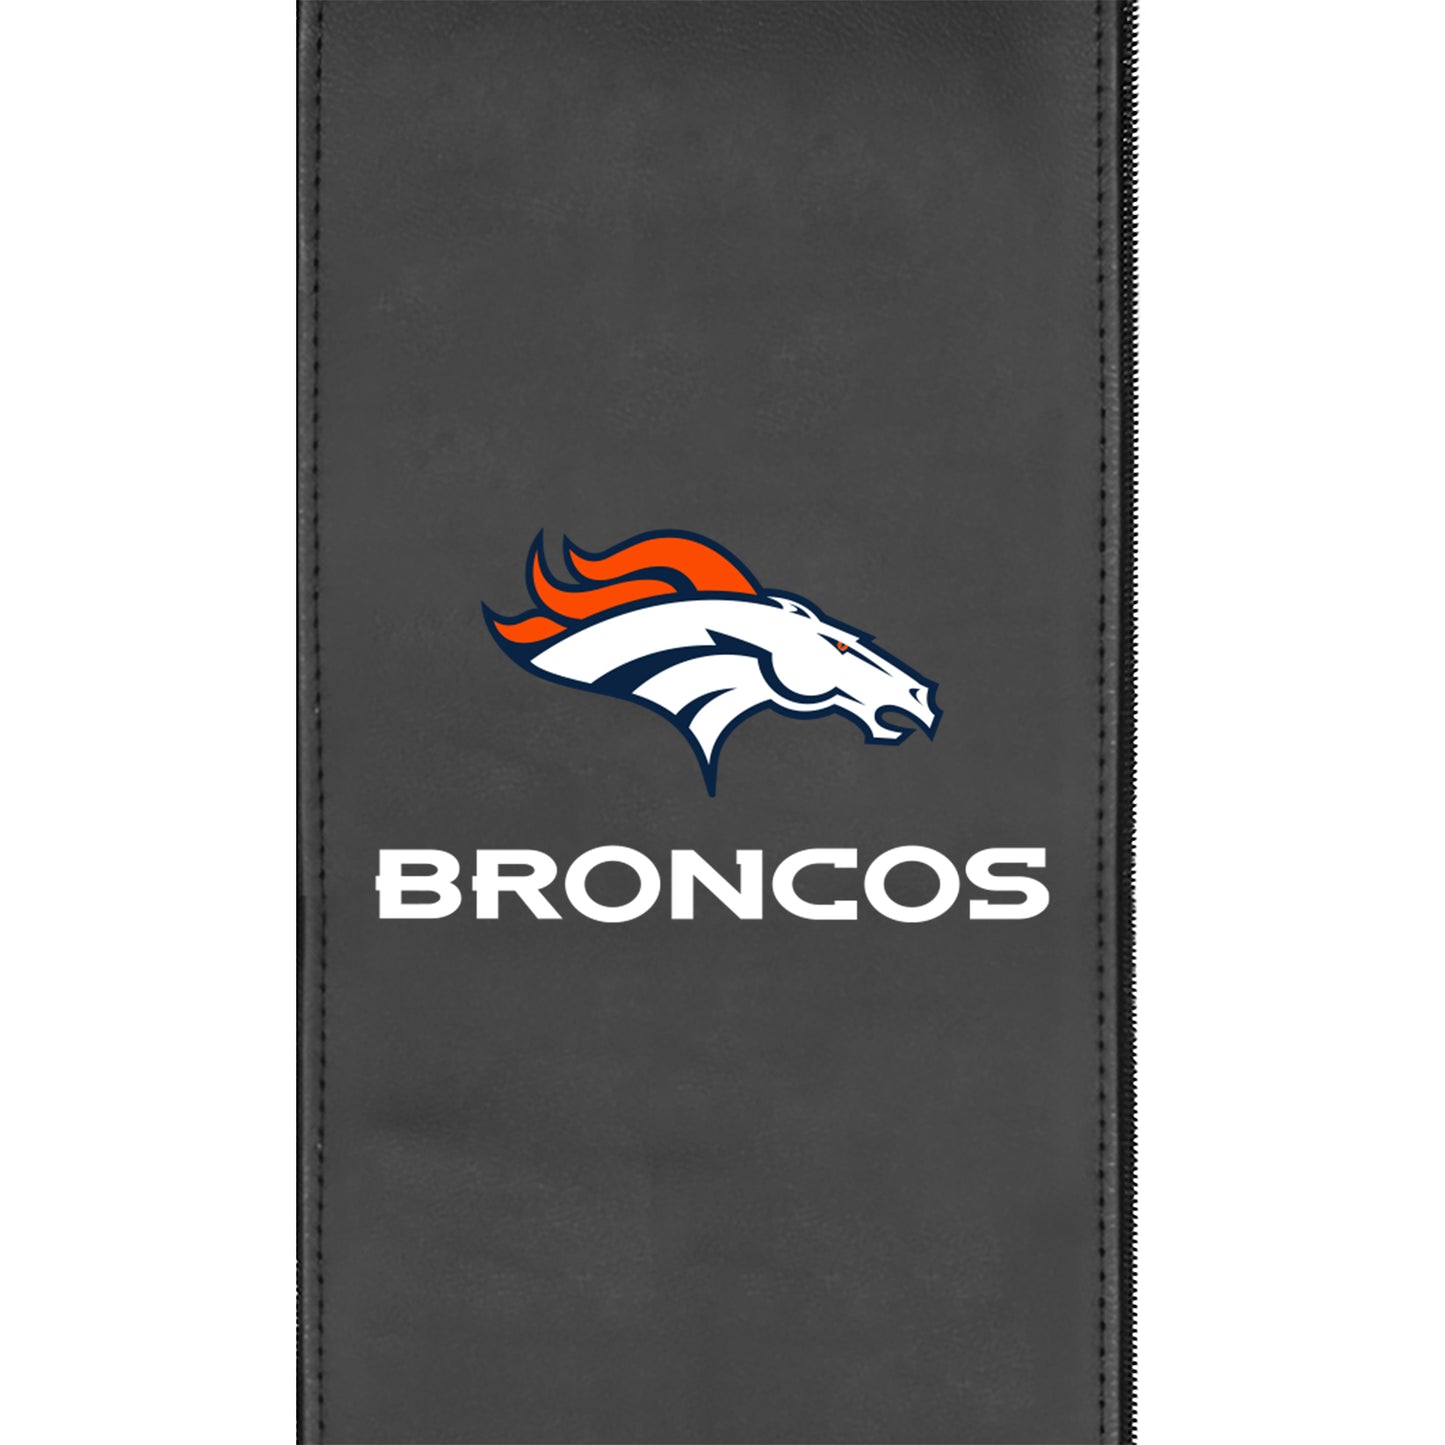 Xpression Pro Gaming Chair with  Denver Broncos Secondary Logo